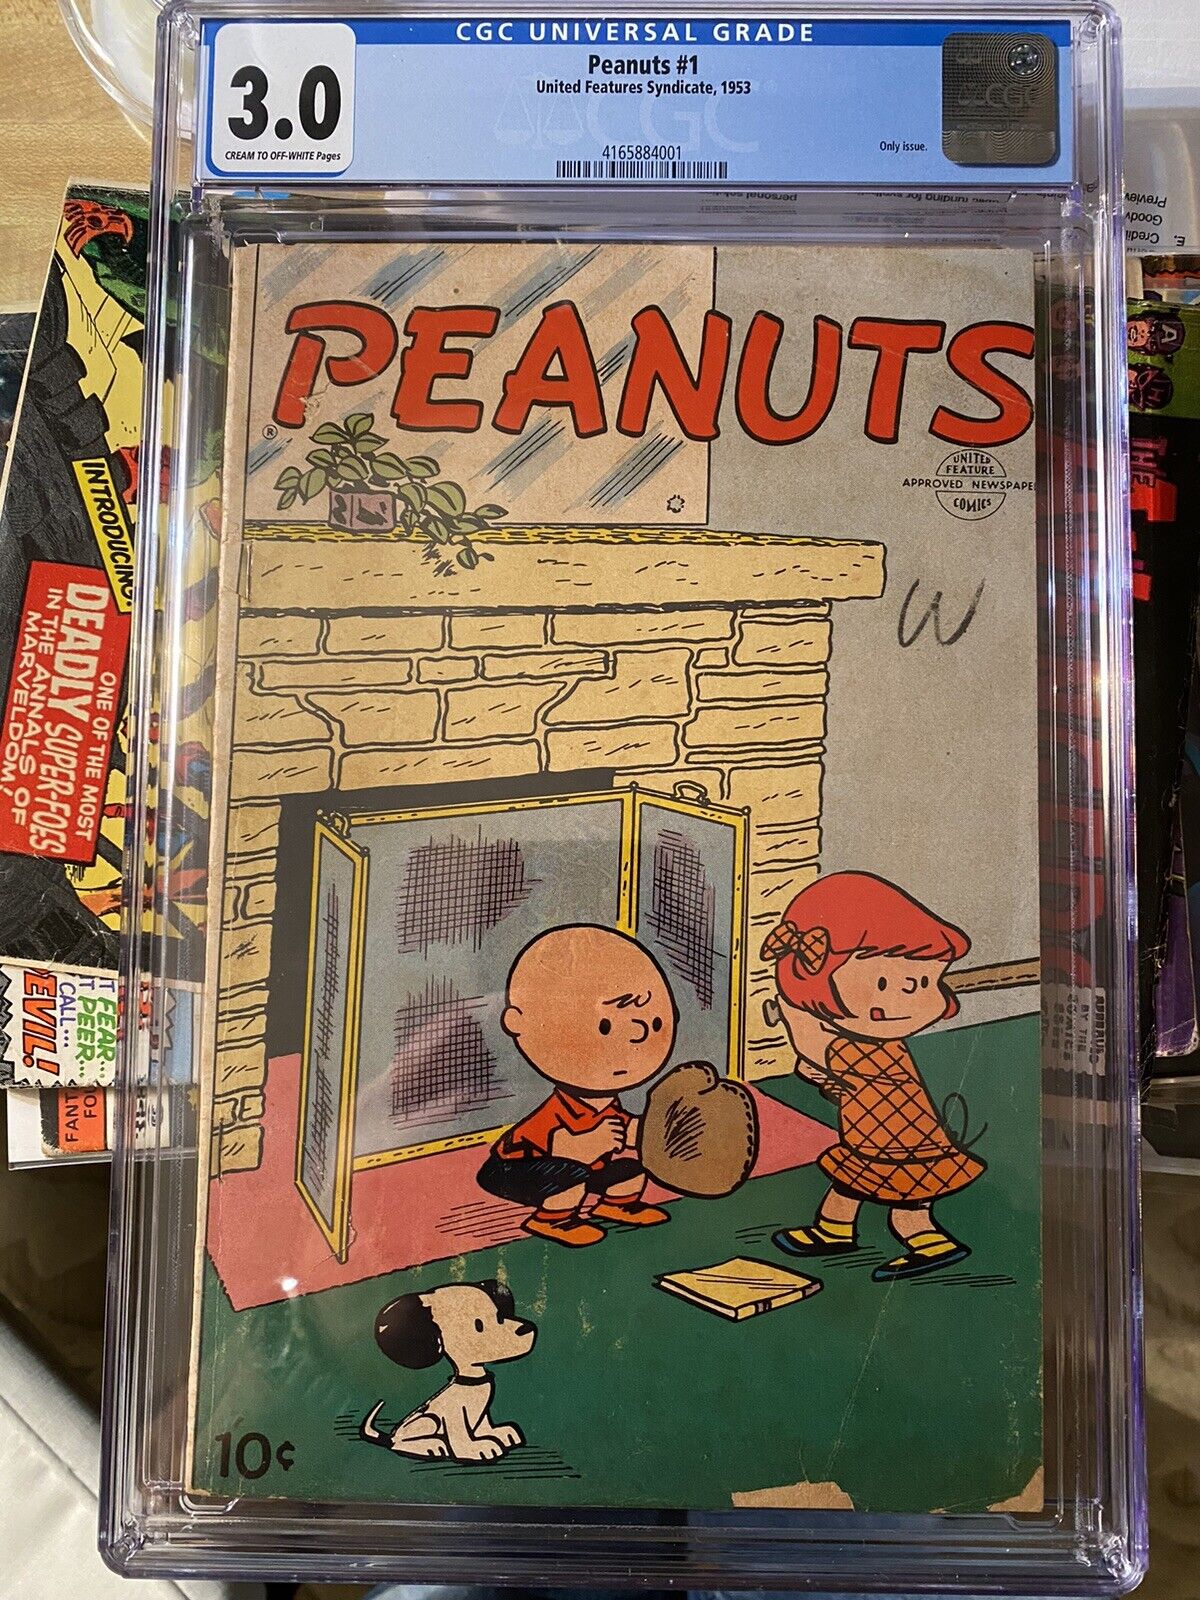 1953 Peanuts 1 United Features Syndicate CGC 3.0